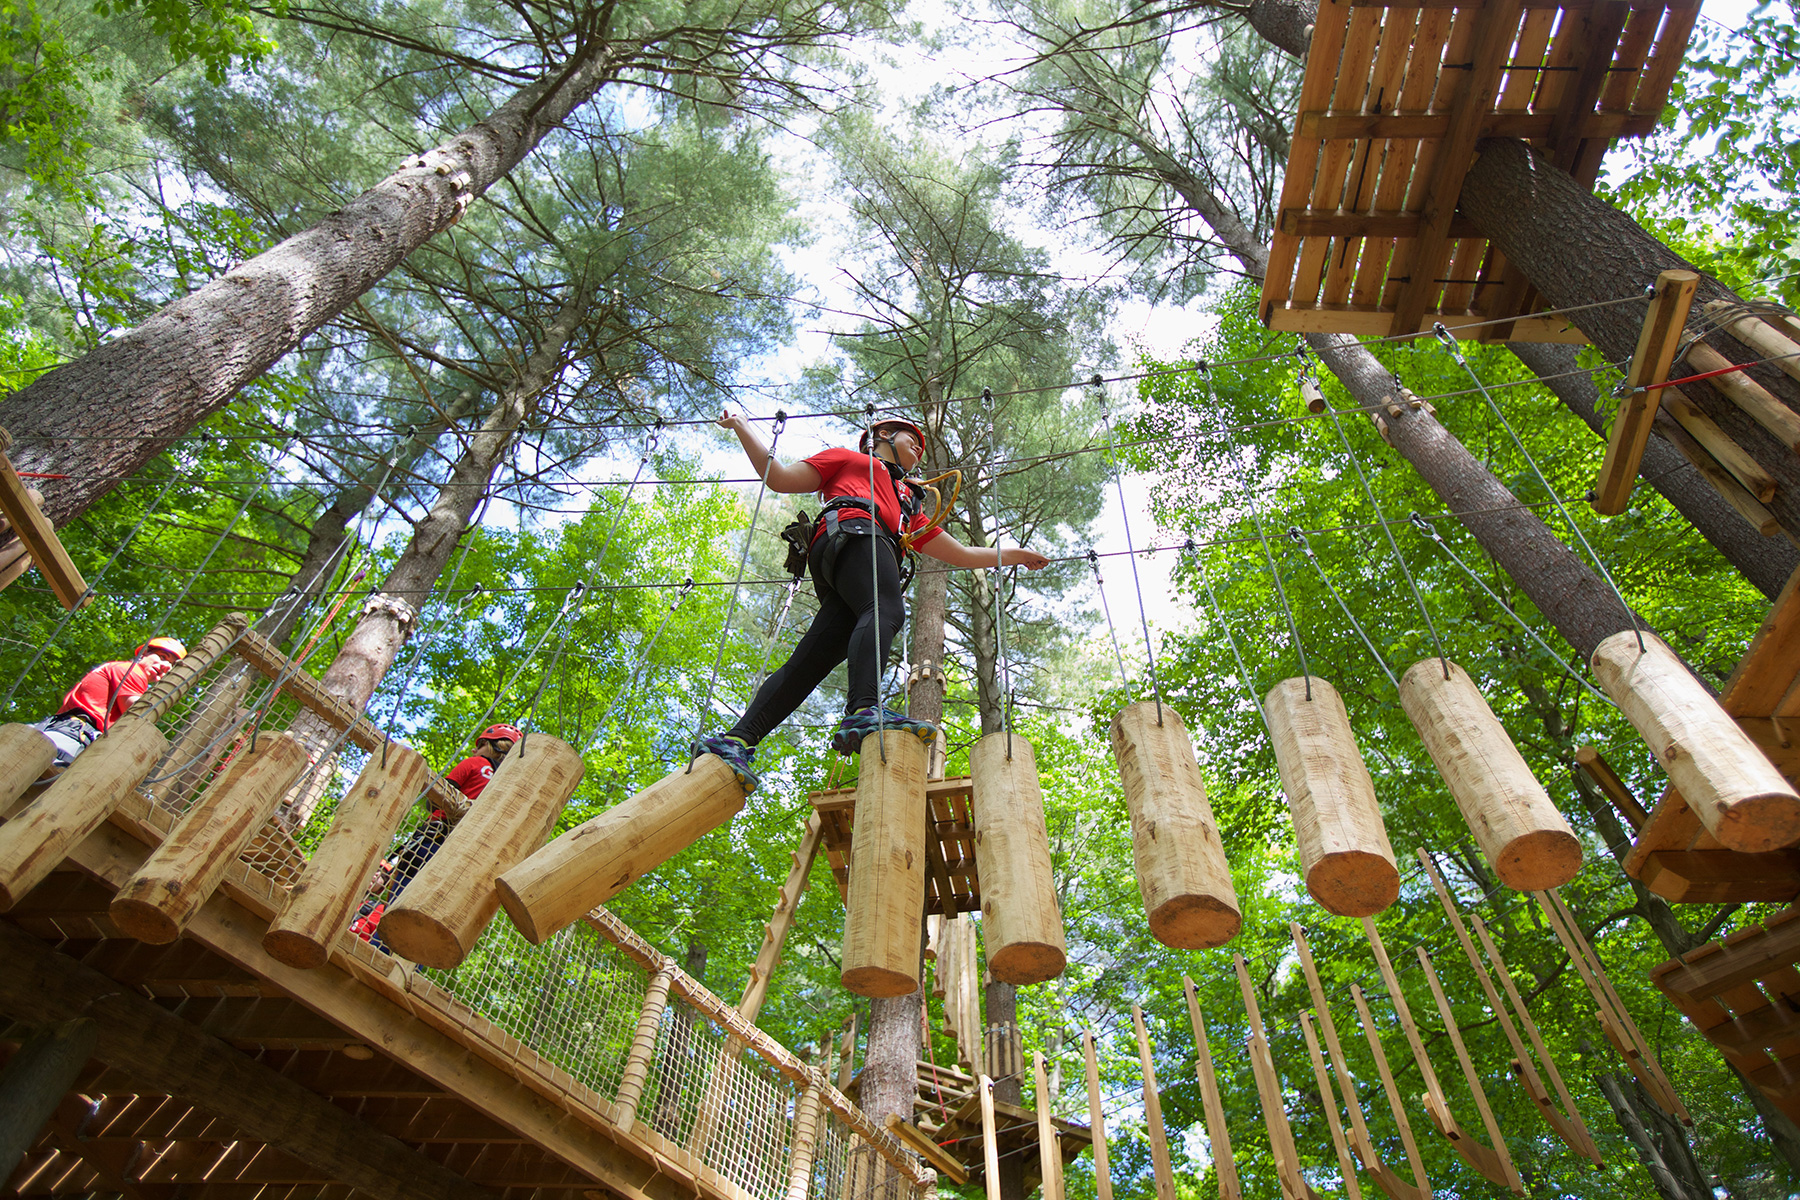 Skywood Eco Adventure | Visit Kingston | Your Next Get-Away Is Here